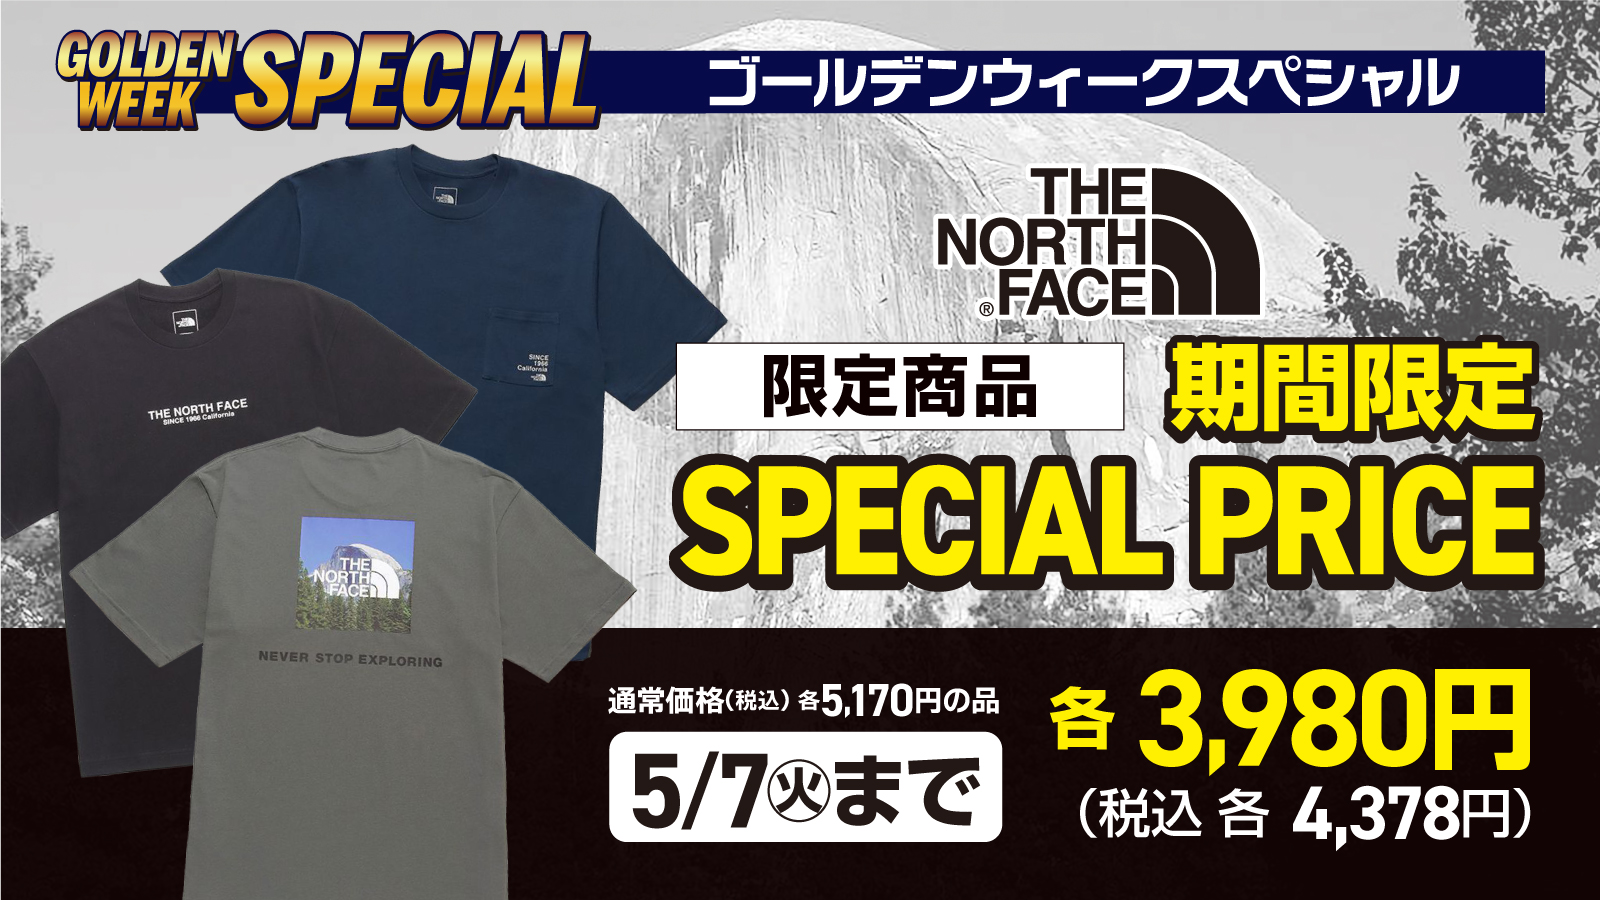 【THE NORTH FACE (ザ・ノース・フェイス)】限定商品 SPECIAL PRICE 5/7(火)まで！